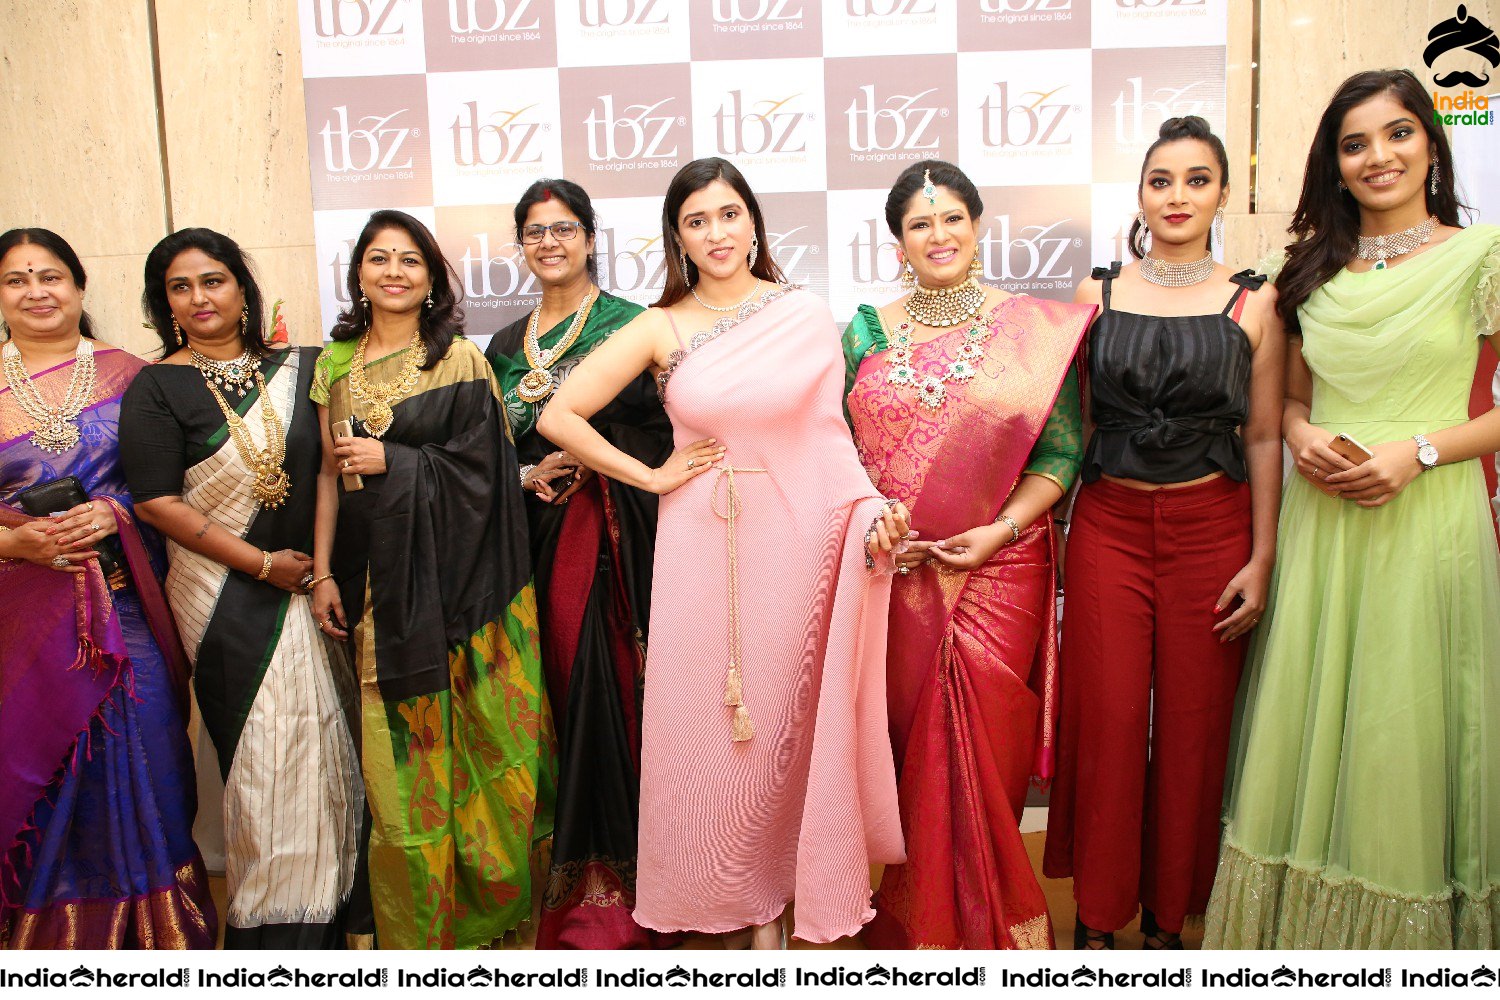 TBZ The Original new festive collections unveils by Filmy Celebrities Set 3